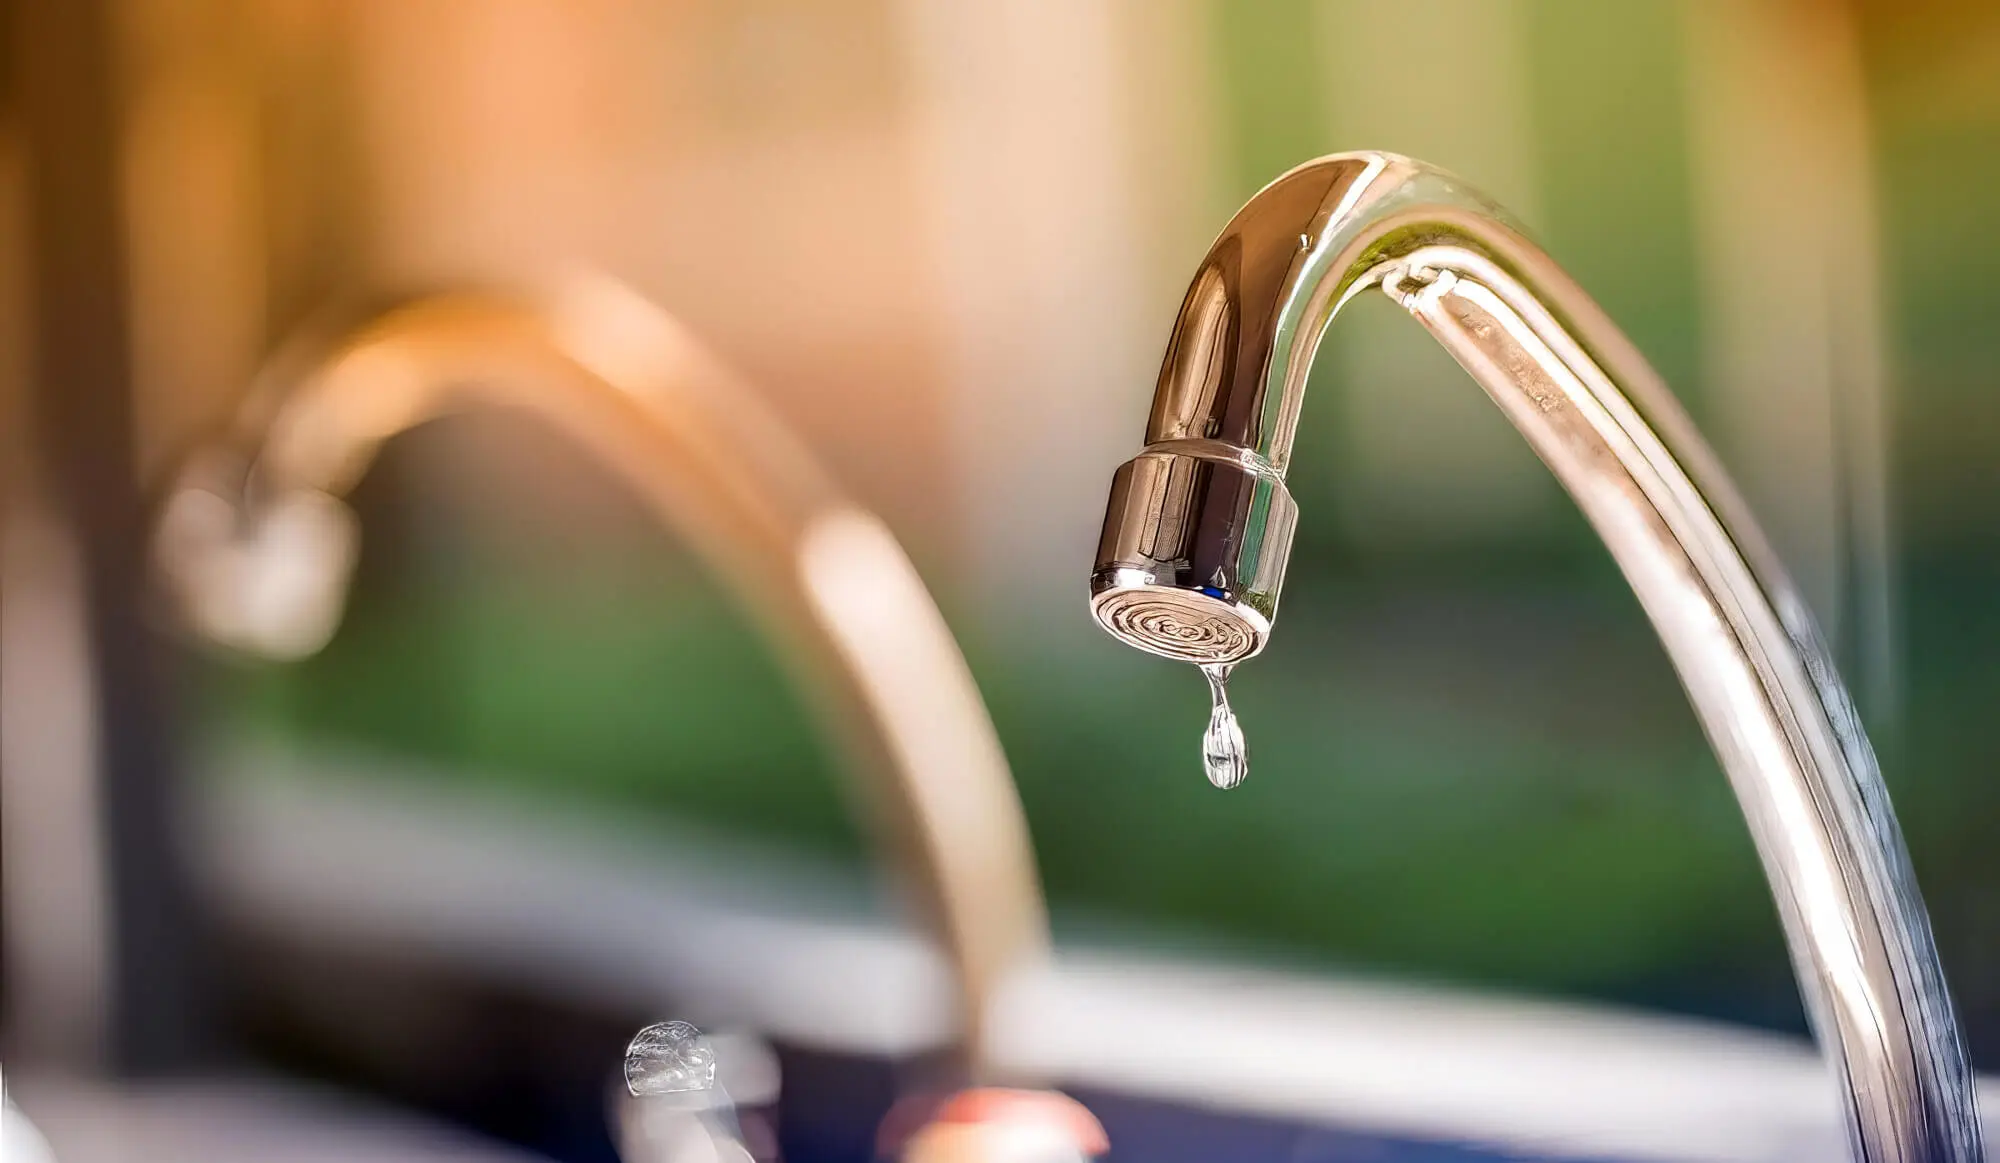 The Drip Dilemma: Consequences of Ignoring Leaky Pipes and Faucets